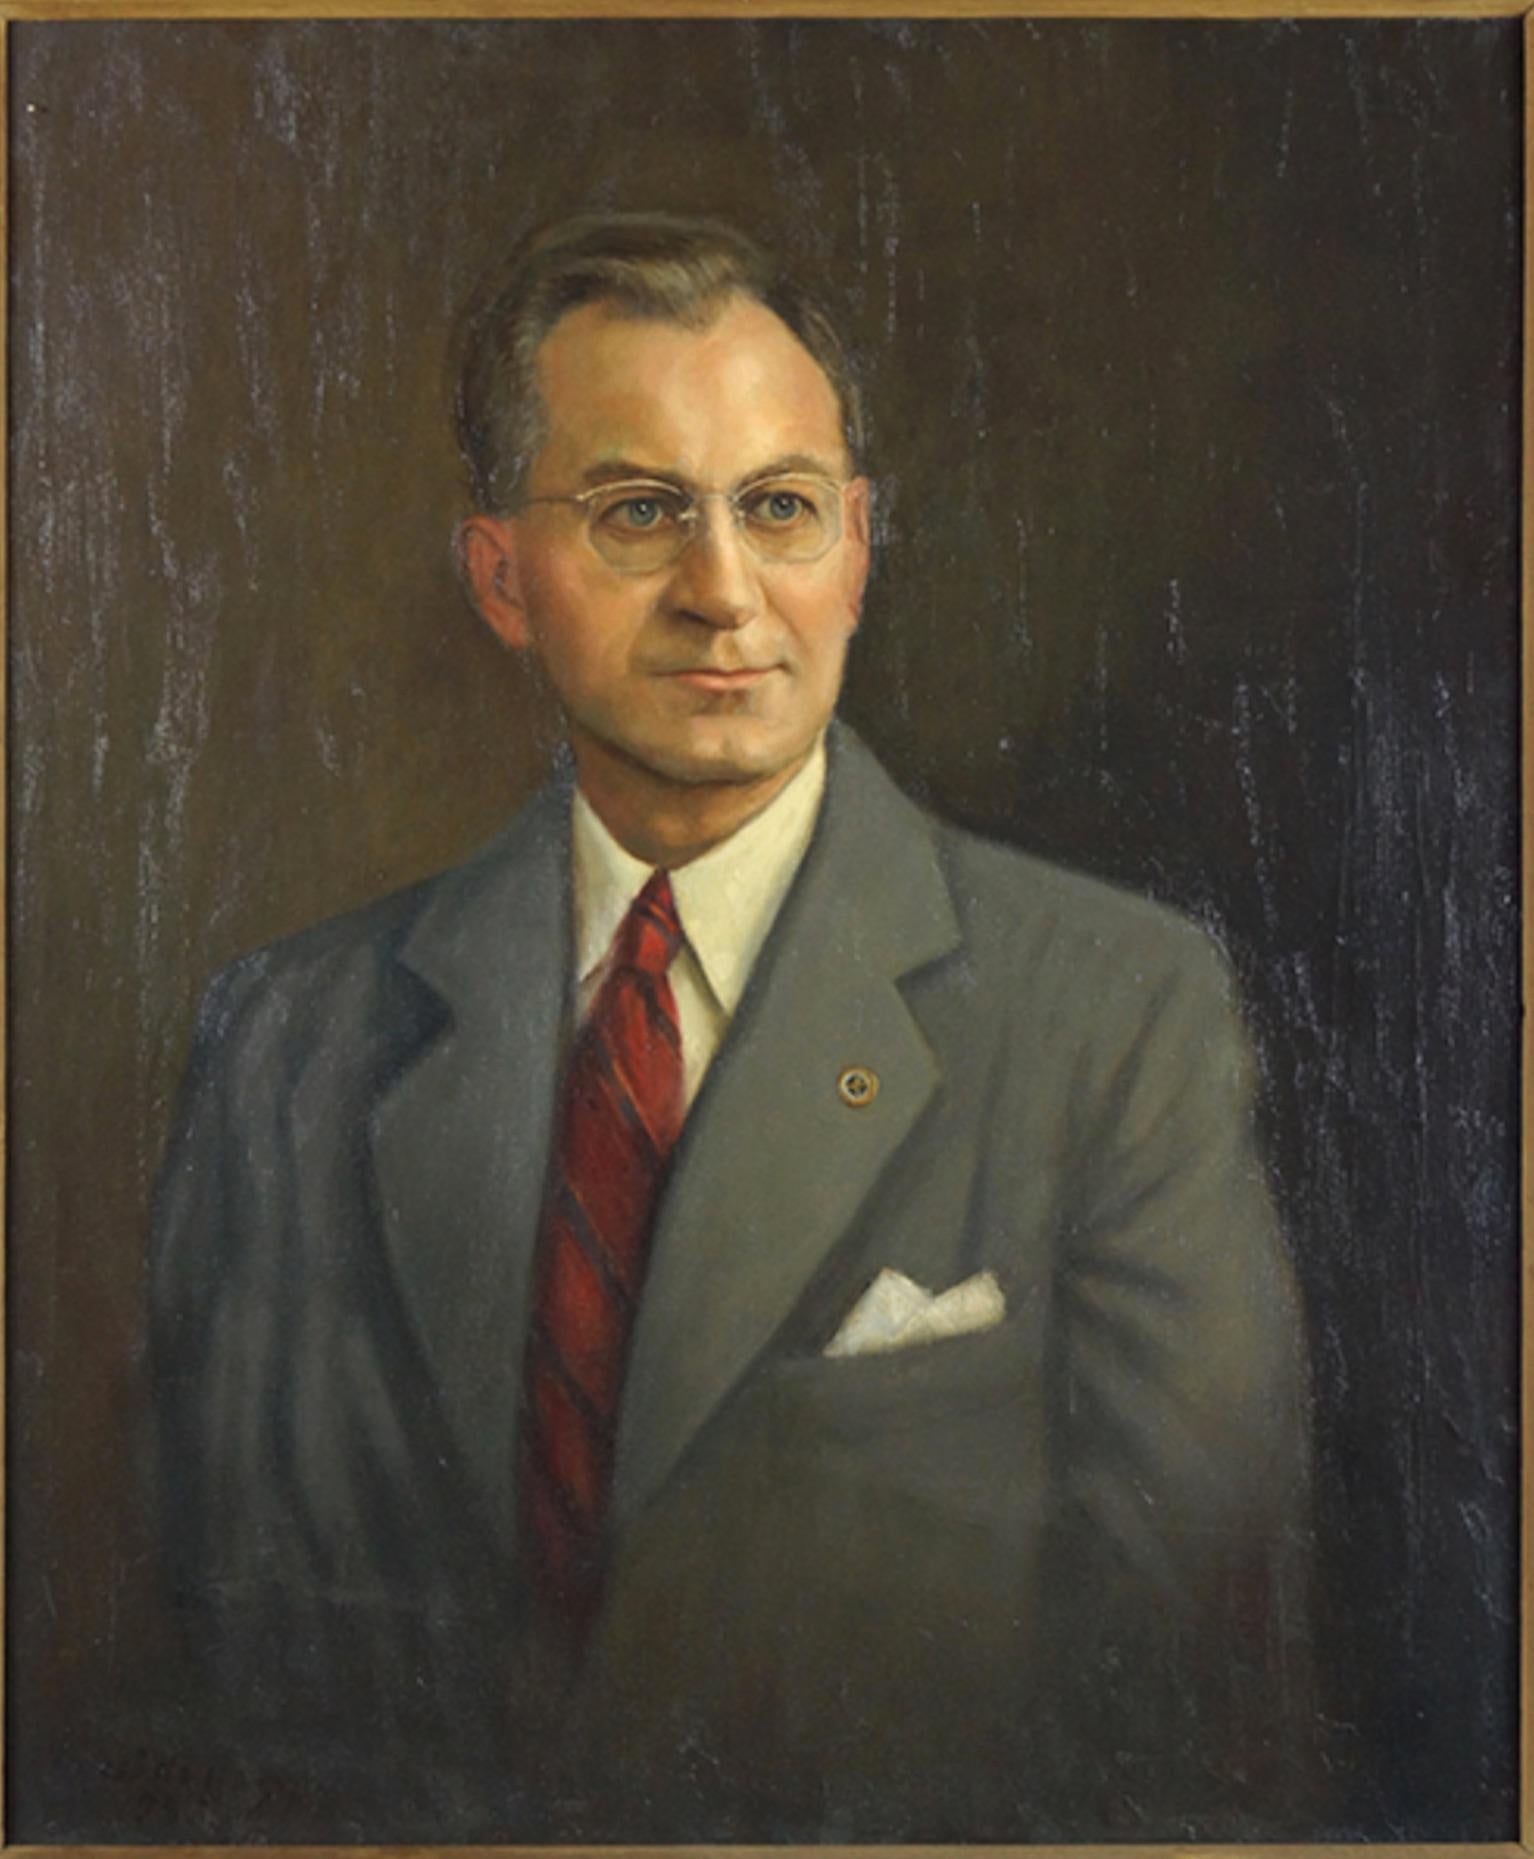 Artist unknown (American, 20th century) portrait of a man.
Oil on canvas, signed lower left and dated 1943.
Measures: 30